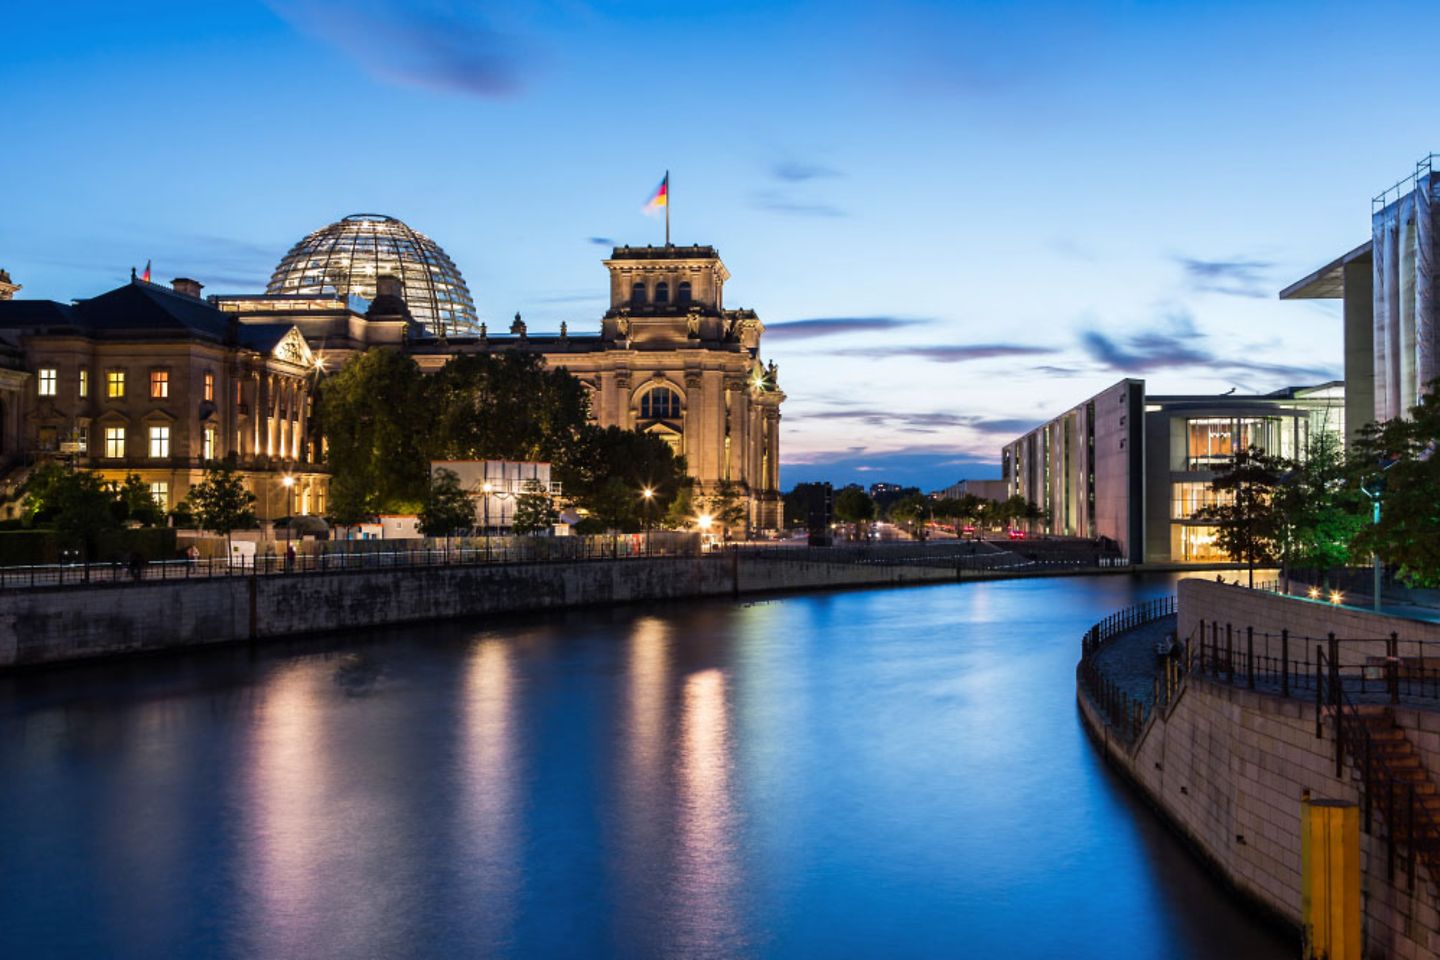 Berlin - Reichstag building/German parliament on the Spree river at dusk.